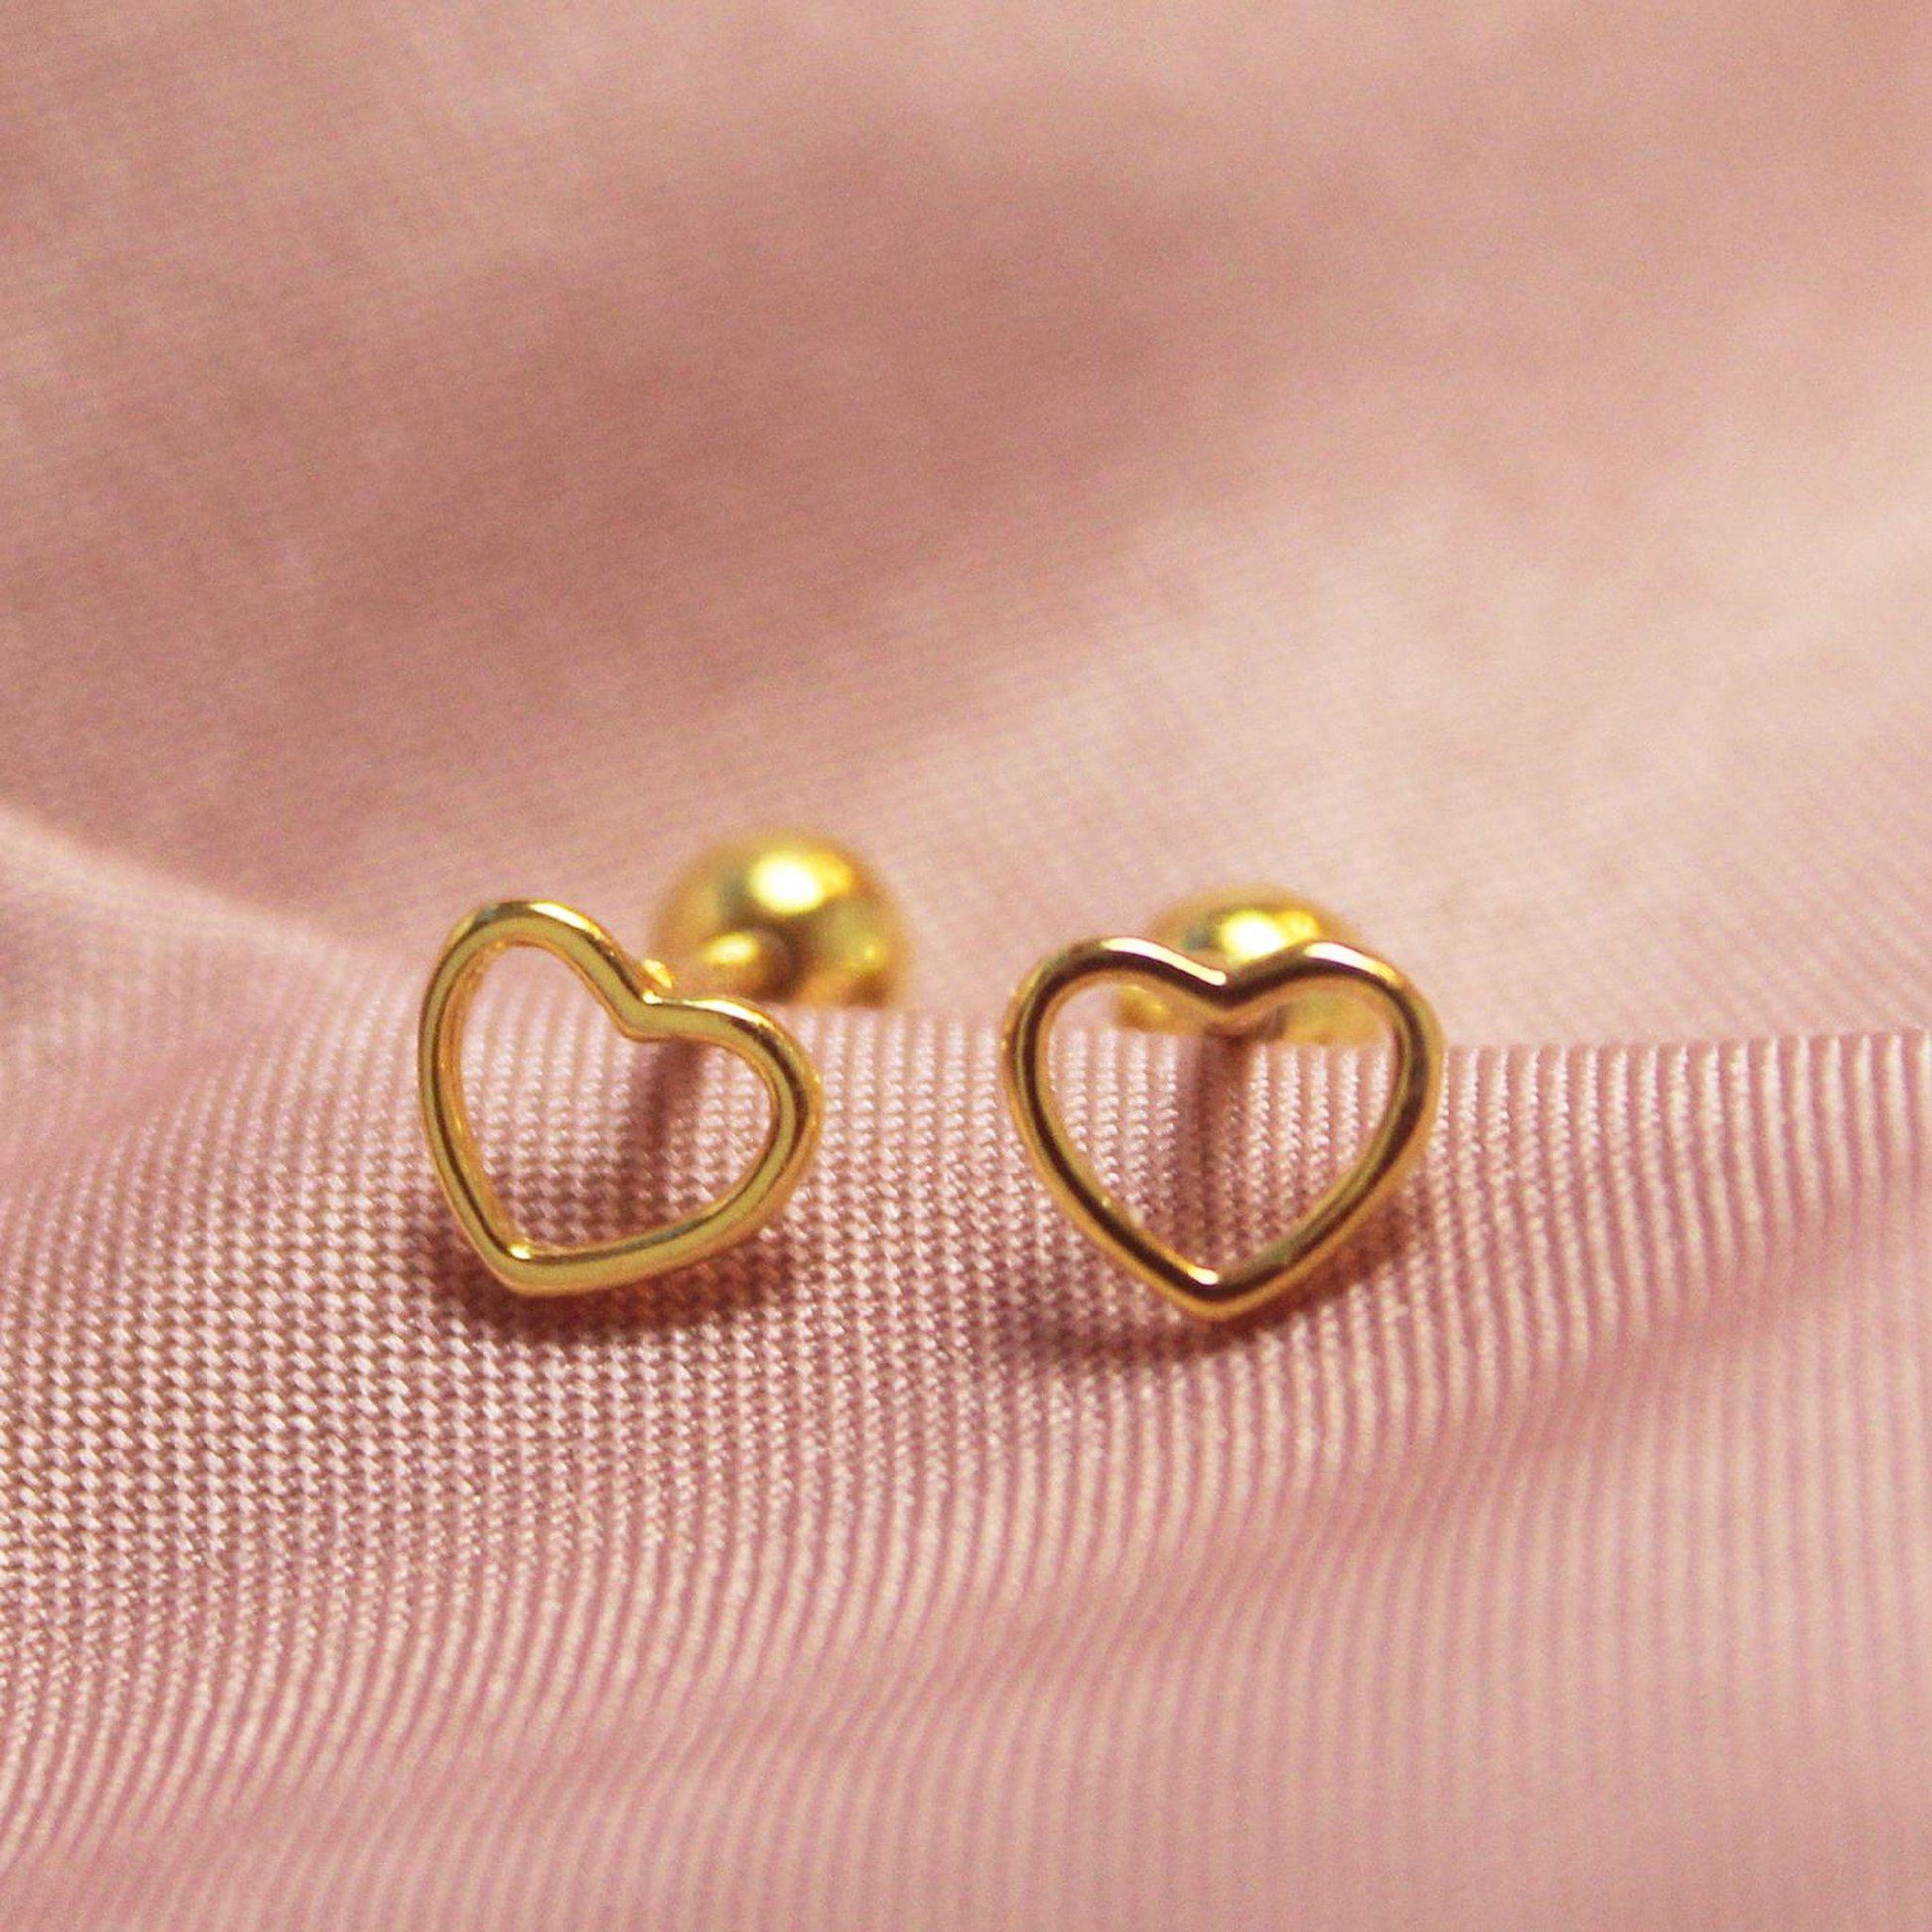 Heart Screw Back Earrings | Tiny Stacking Earring Studs | Hypo-Allergenic & Nickel-Free Jewelry Gold